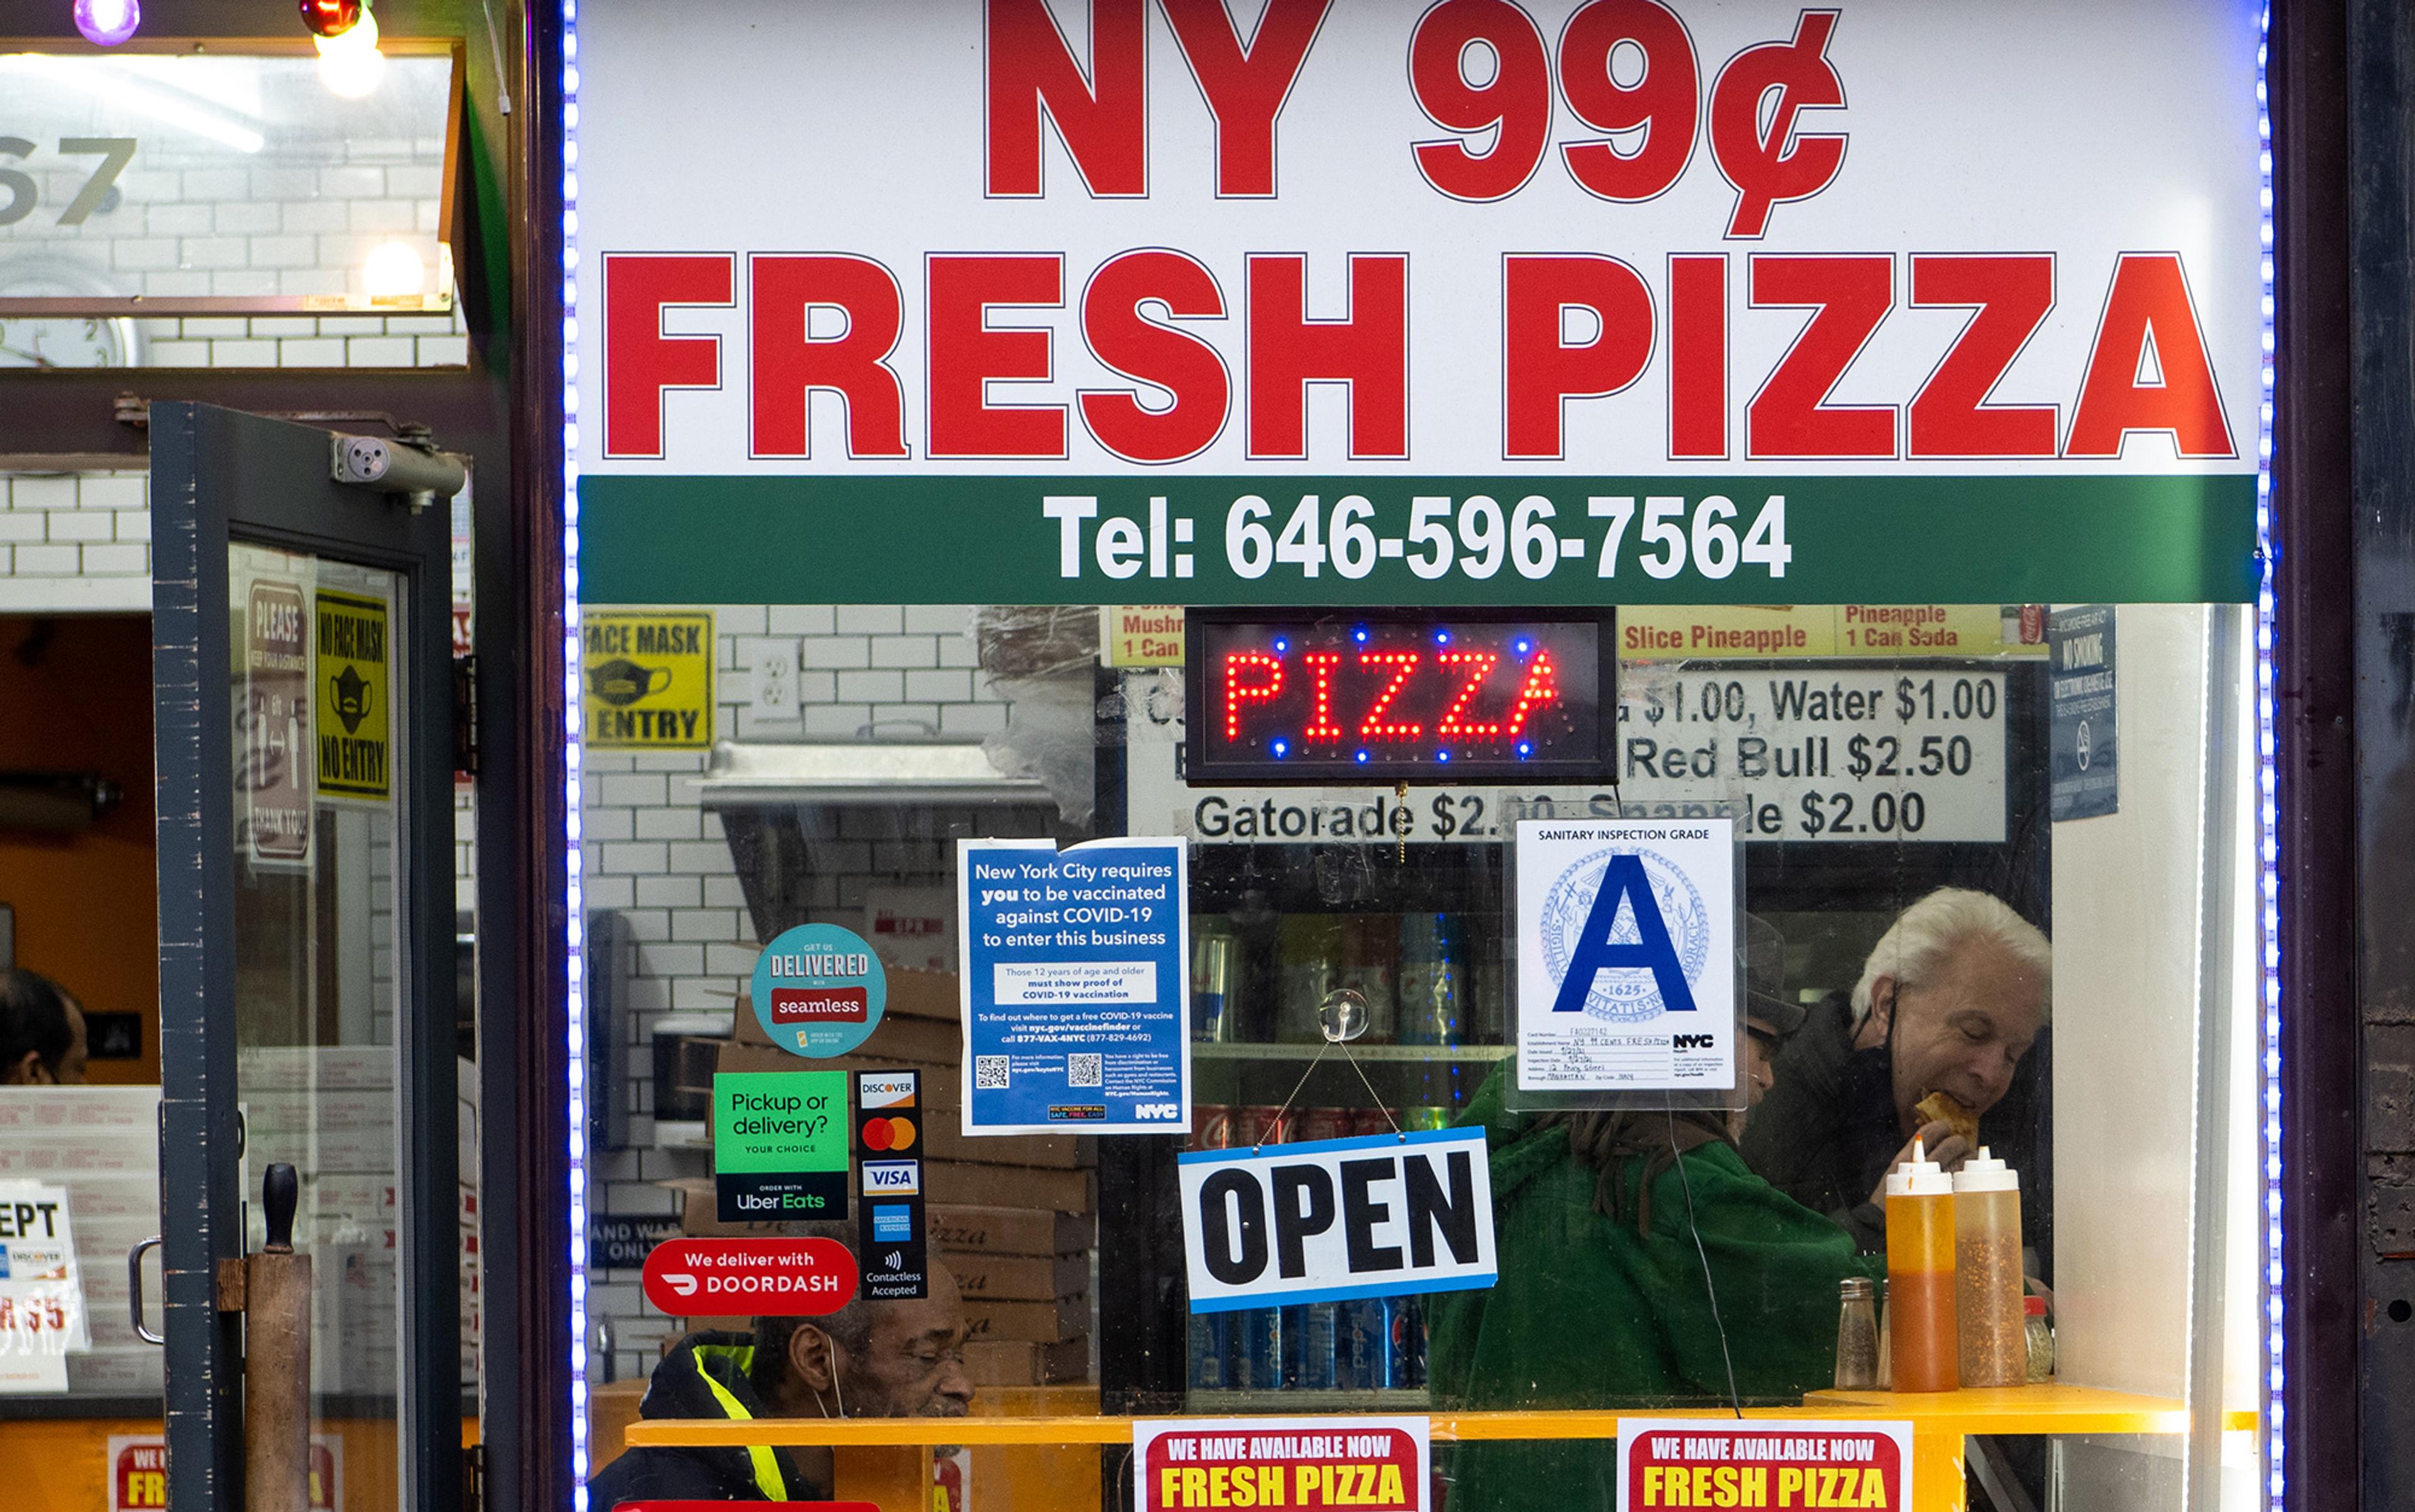 Shopfront of NY 99 Cent Fresh Pizza with an open sign, vaccine notice, and menu visible through the window.